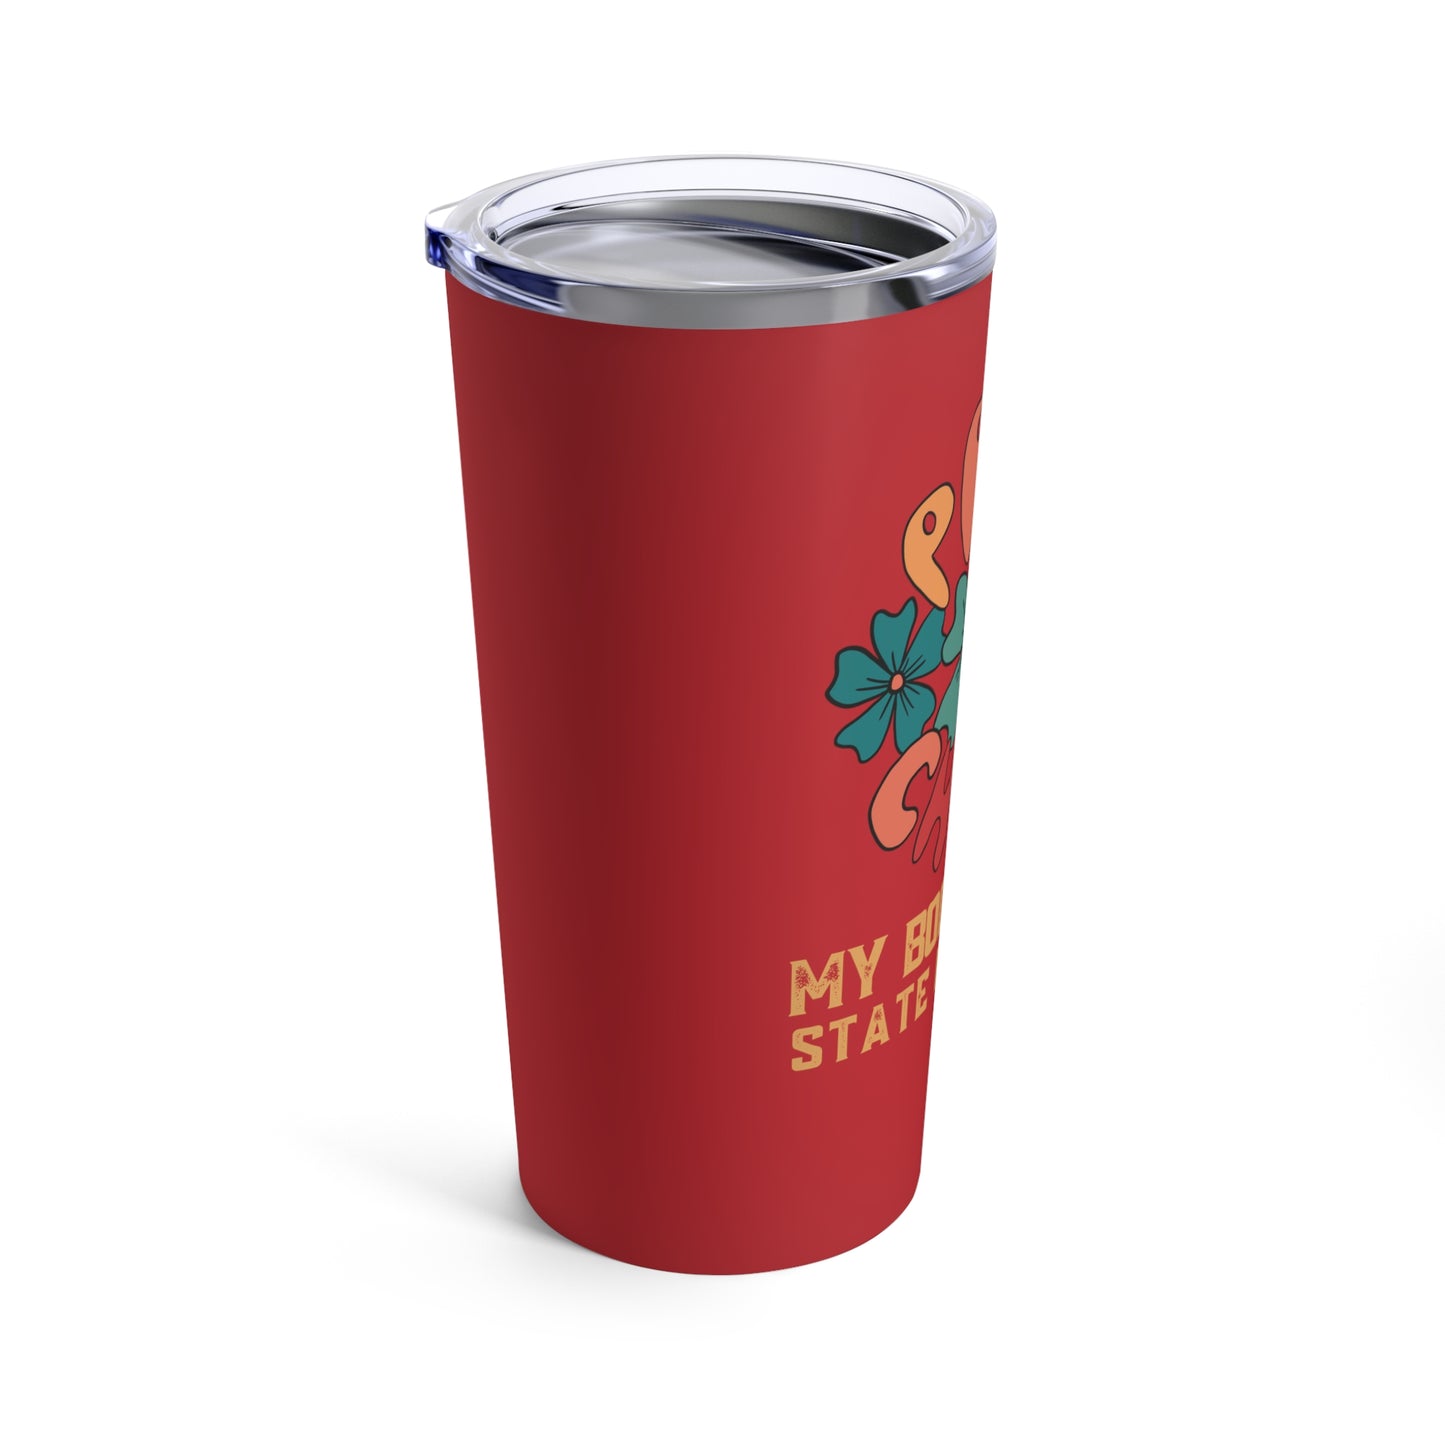 This 20 oz tumbler is idea for  progressive rally and protest attendees. Buy in bulk and let everyone stand in solidarity for a woman's right to choose. Red tumbler with lid